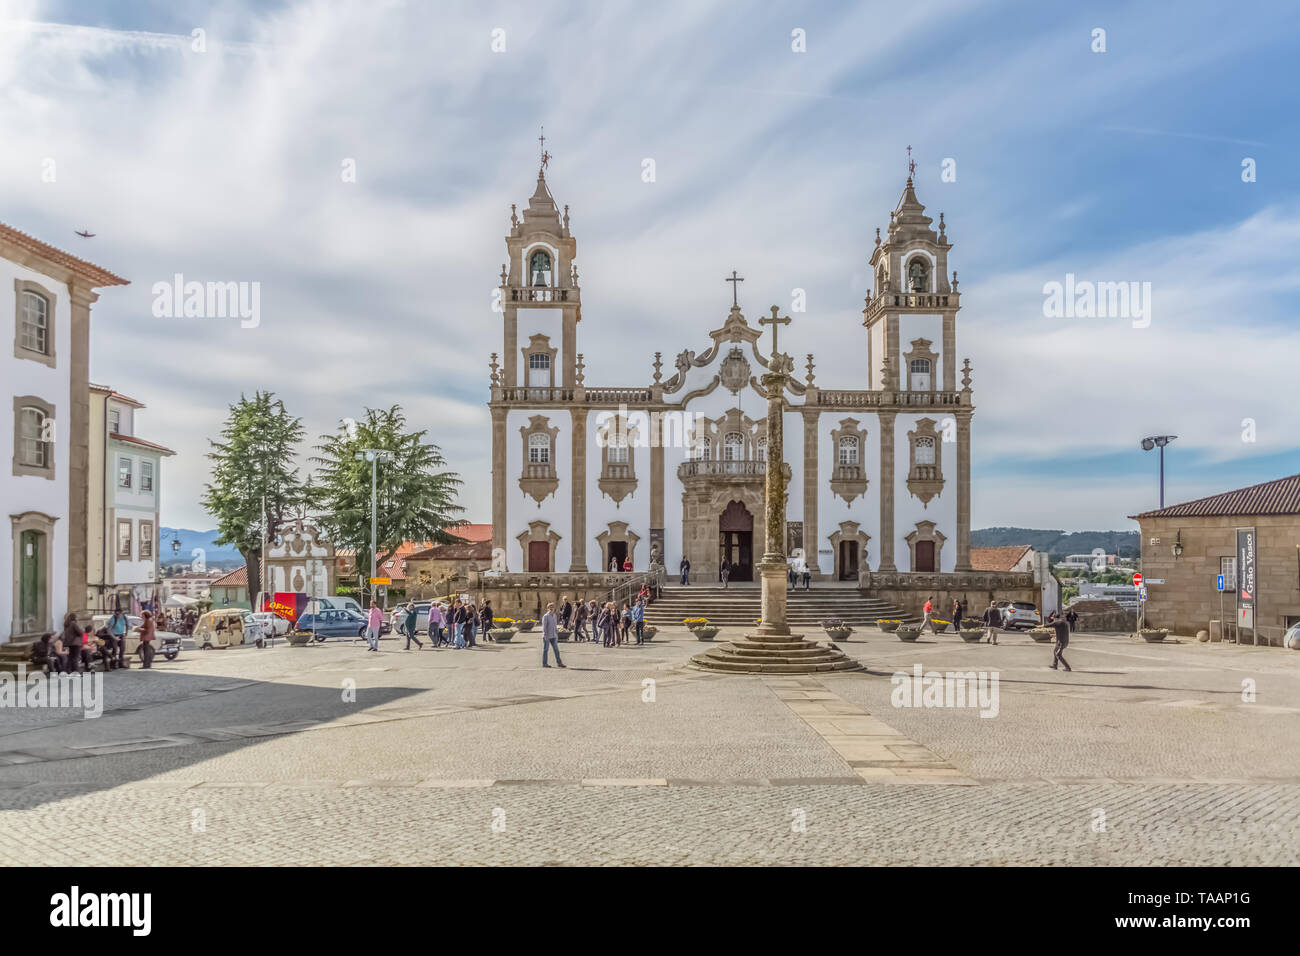 Viseu / Portugal - 04 16 2019 : View at the front facade at the Church of Mercy, Igreja da Misericordia, baroque style monument, architectural icon of Stock Photo